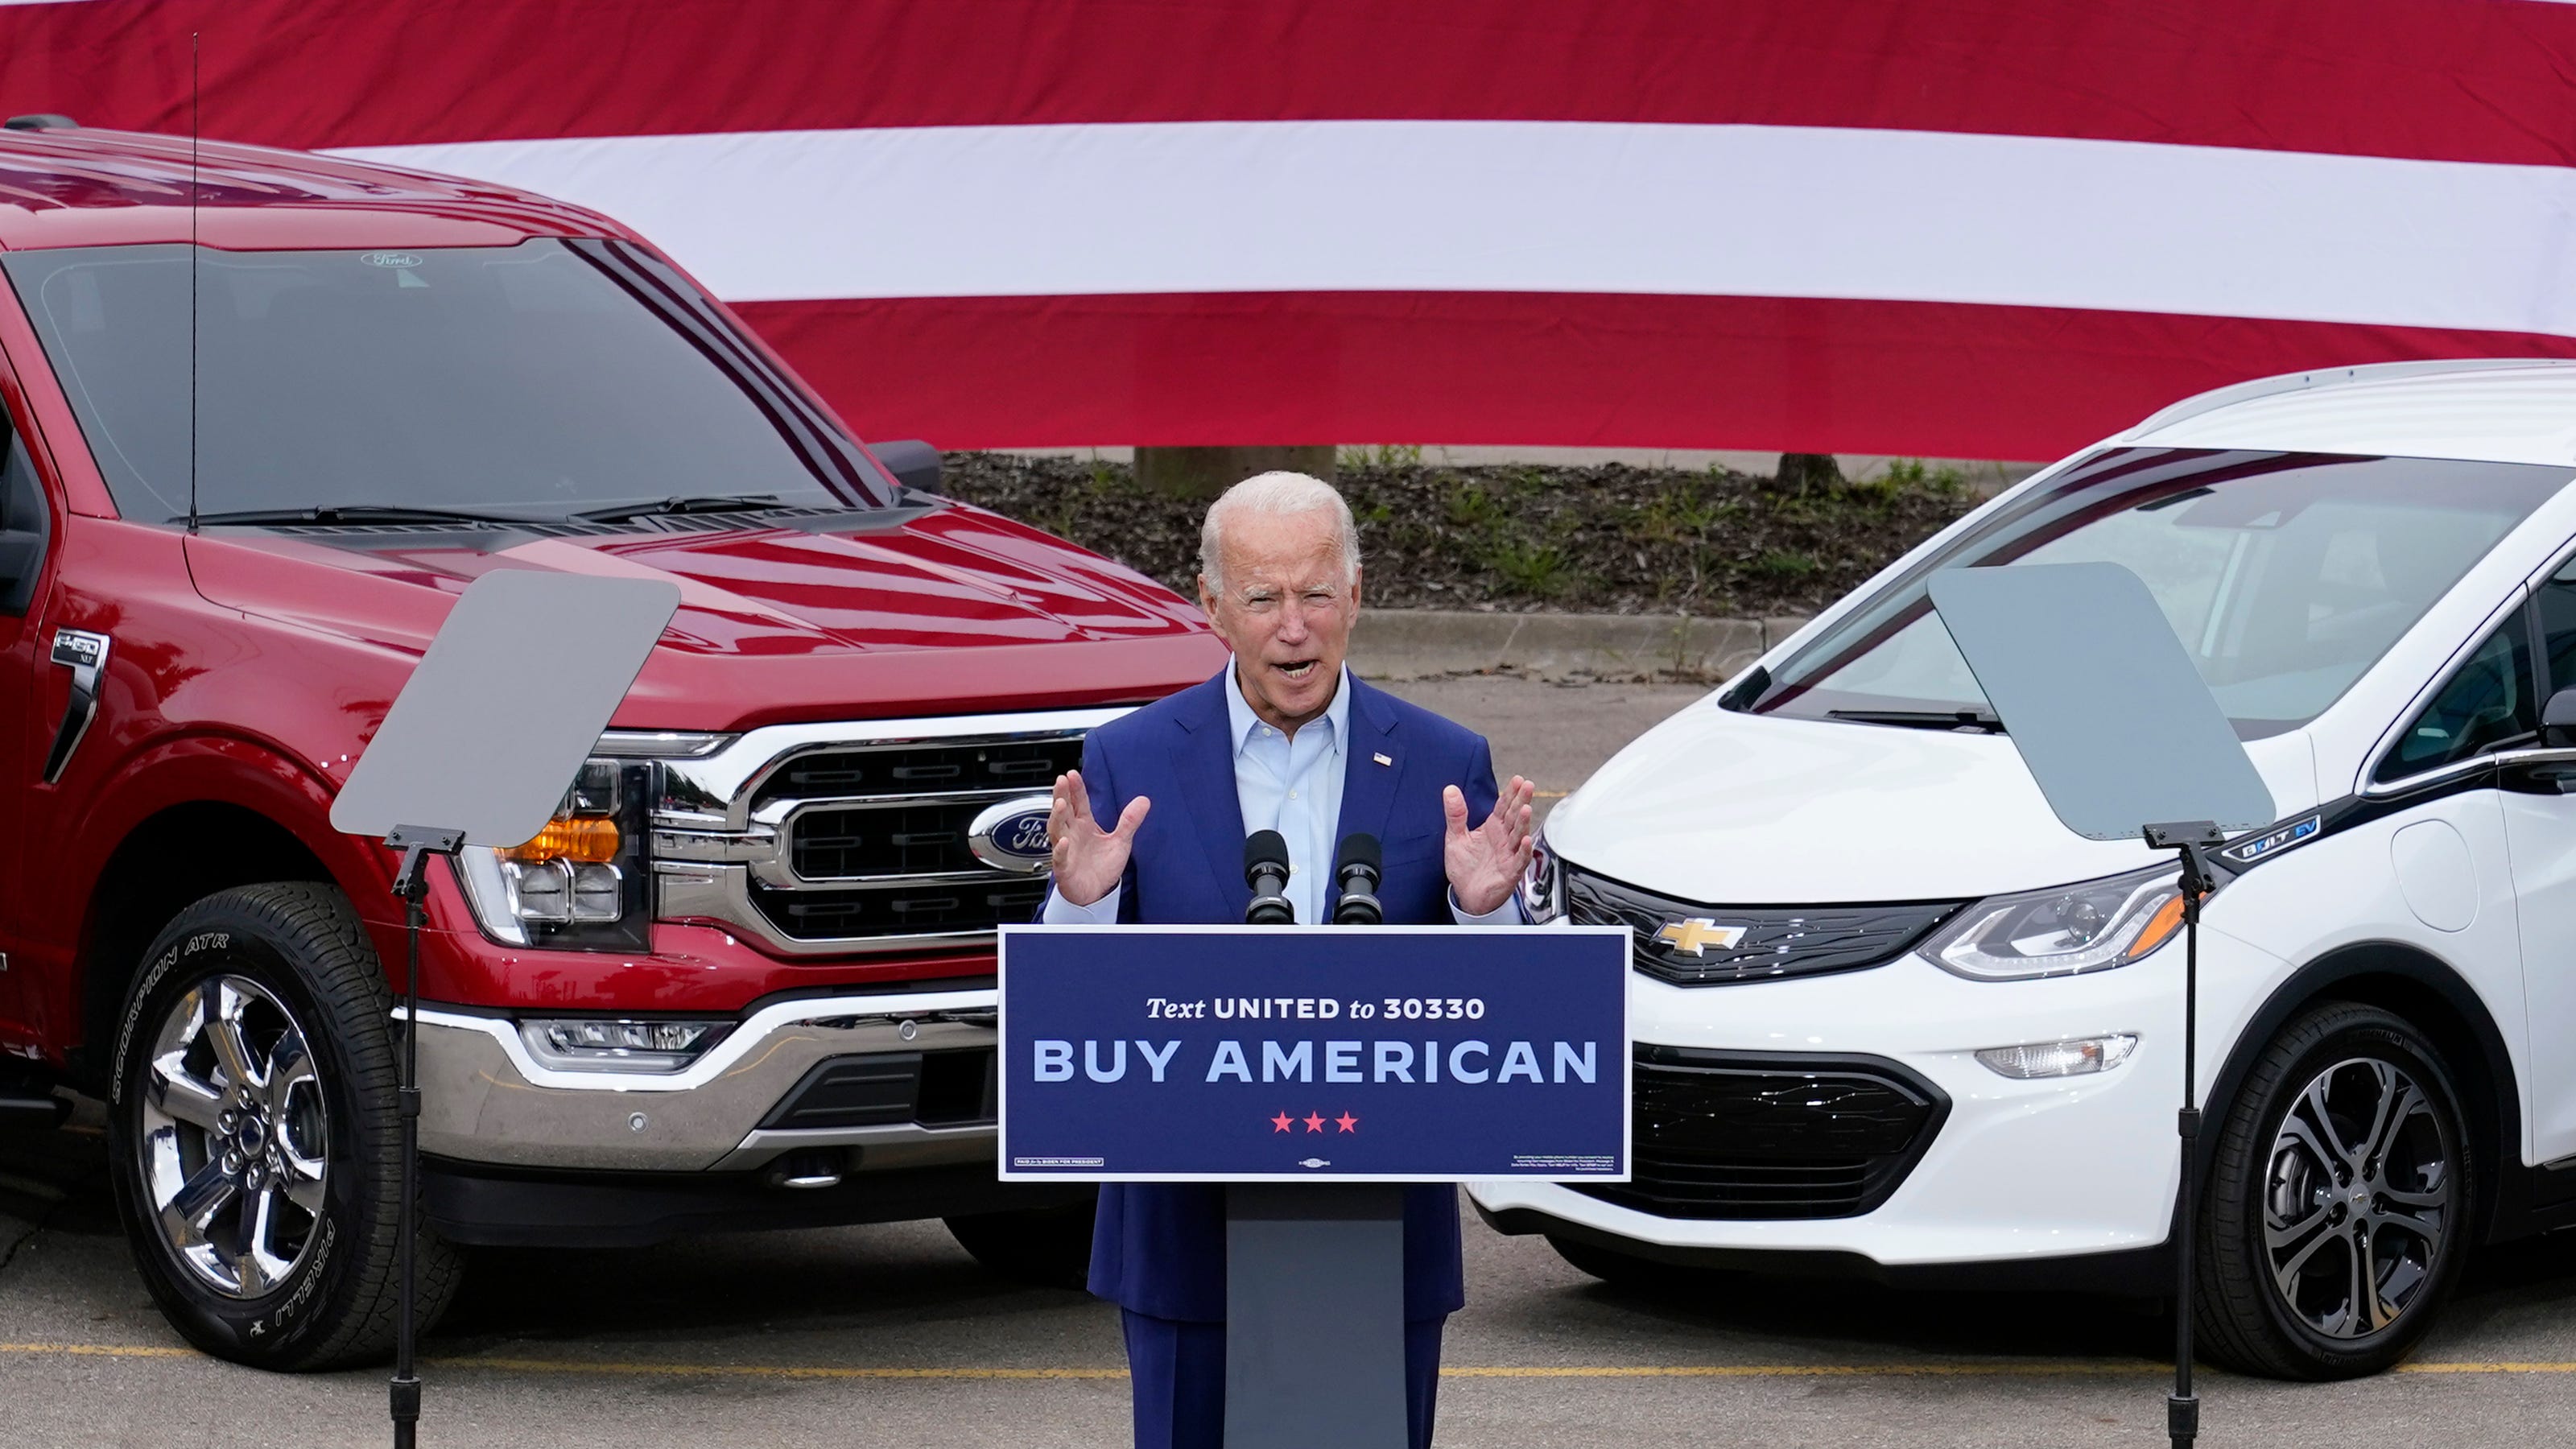 biden-supports-carmakers-ev-plans-but-they-will-likely-cost-jobs